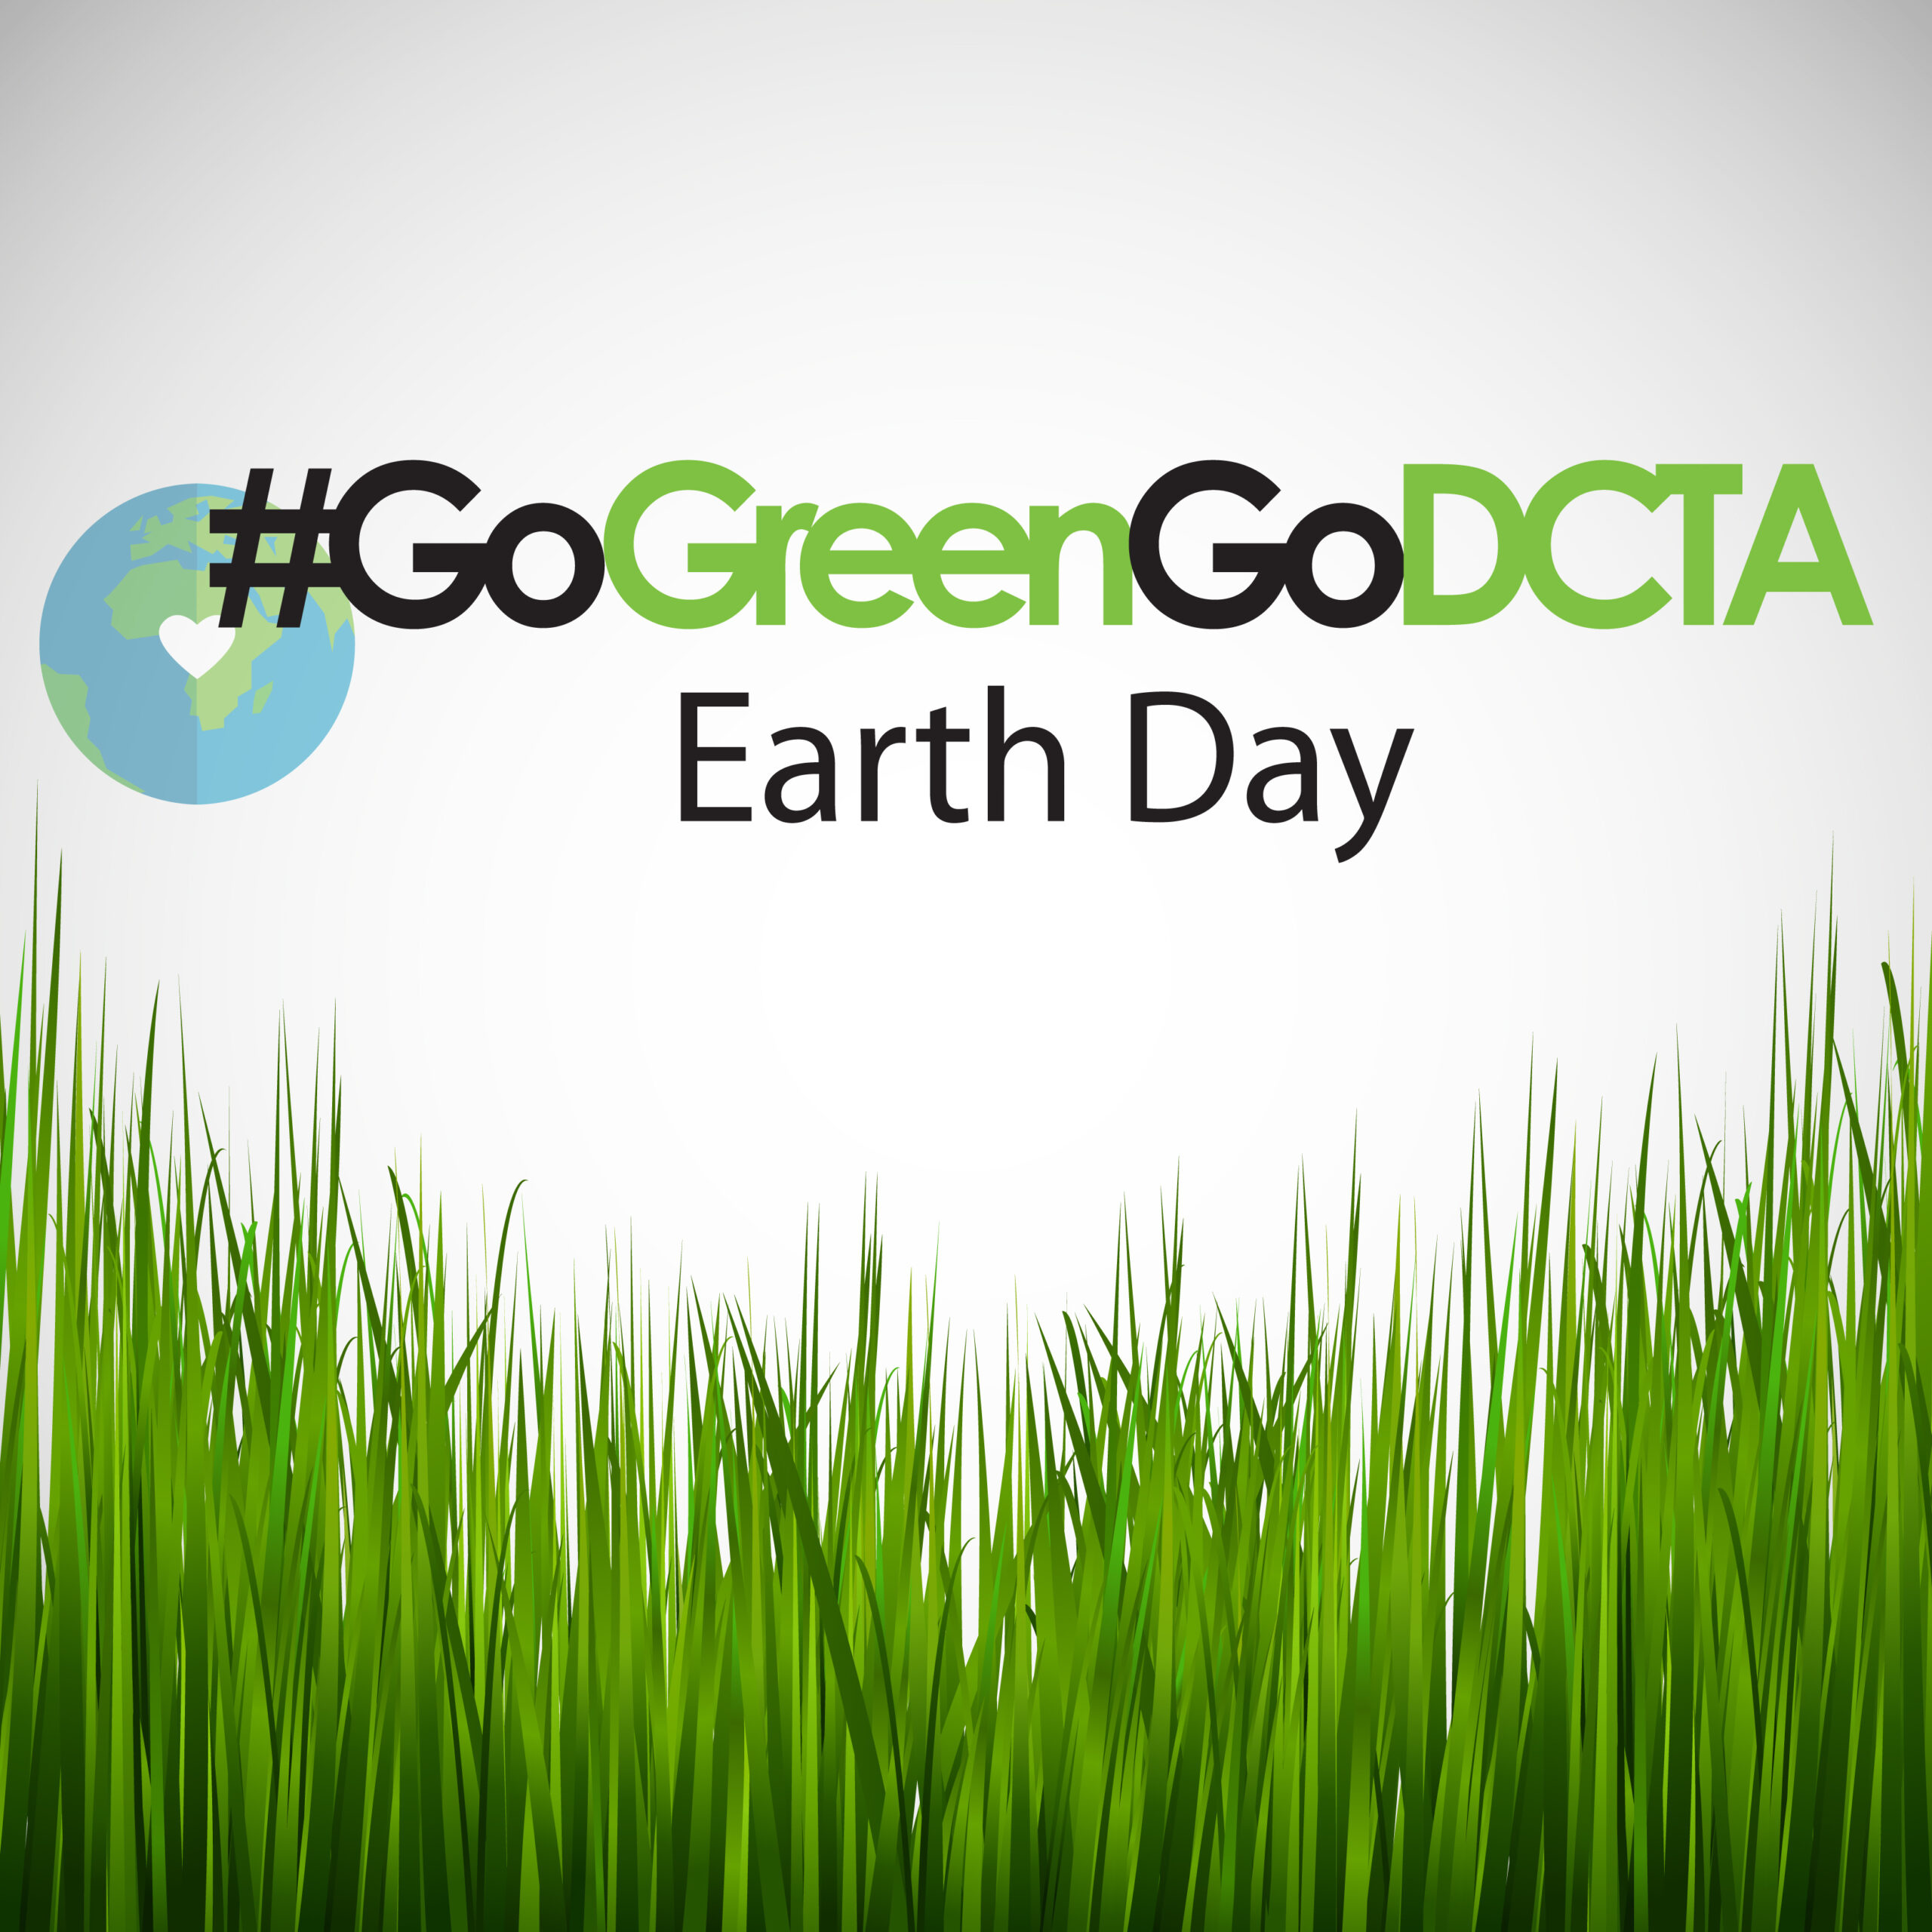 DCTA Goes Green for Earth Day